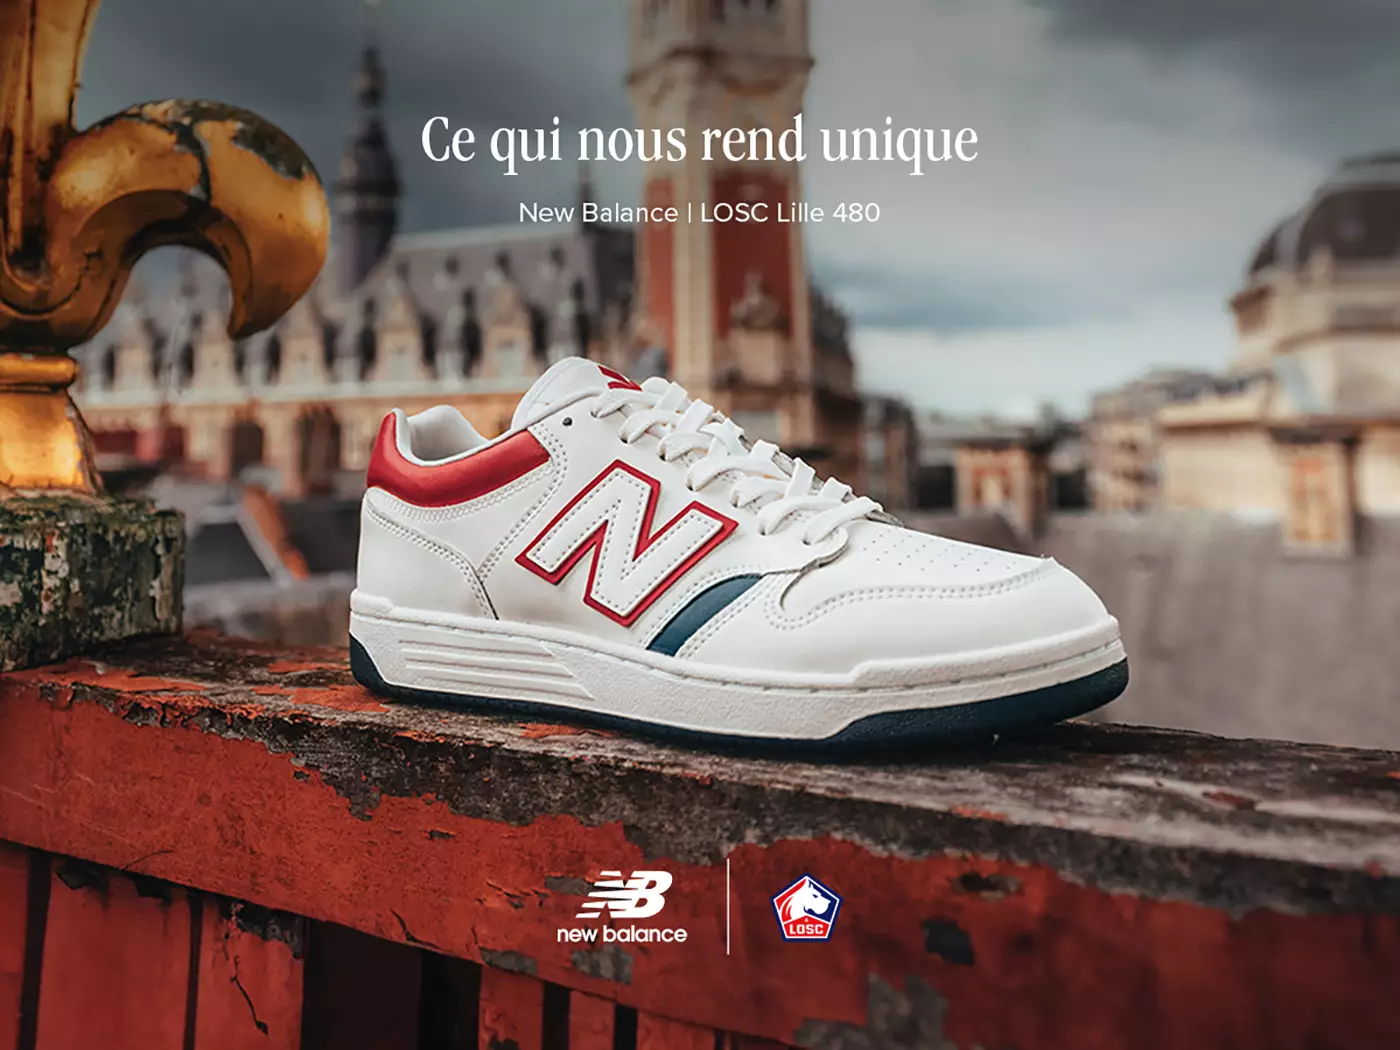 Walking the Lille Legacy with New Balance 480 LOSC